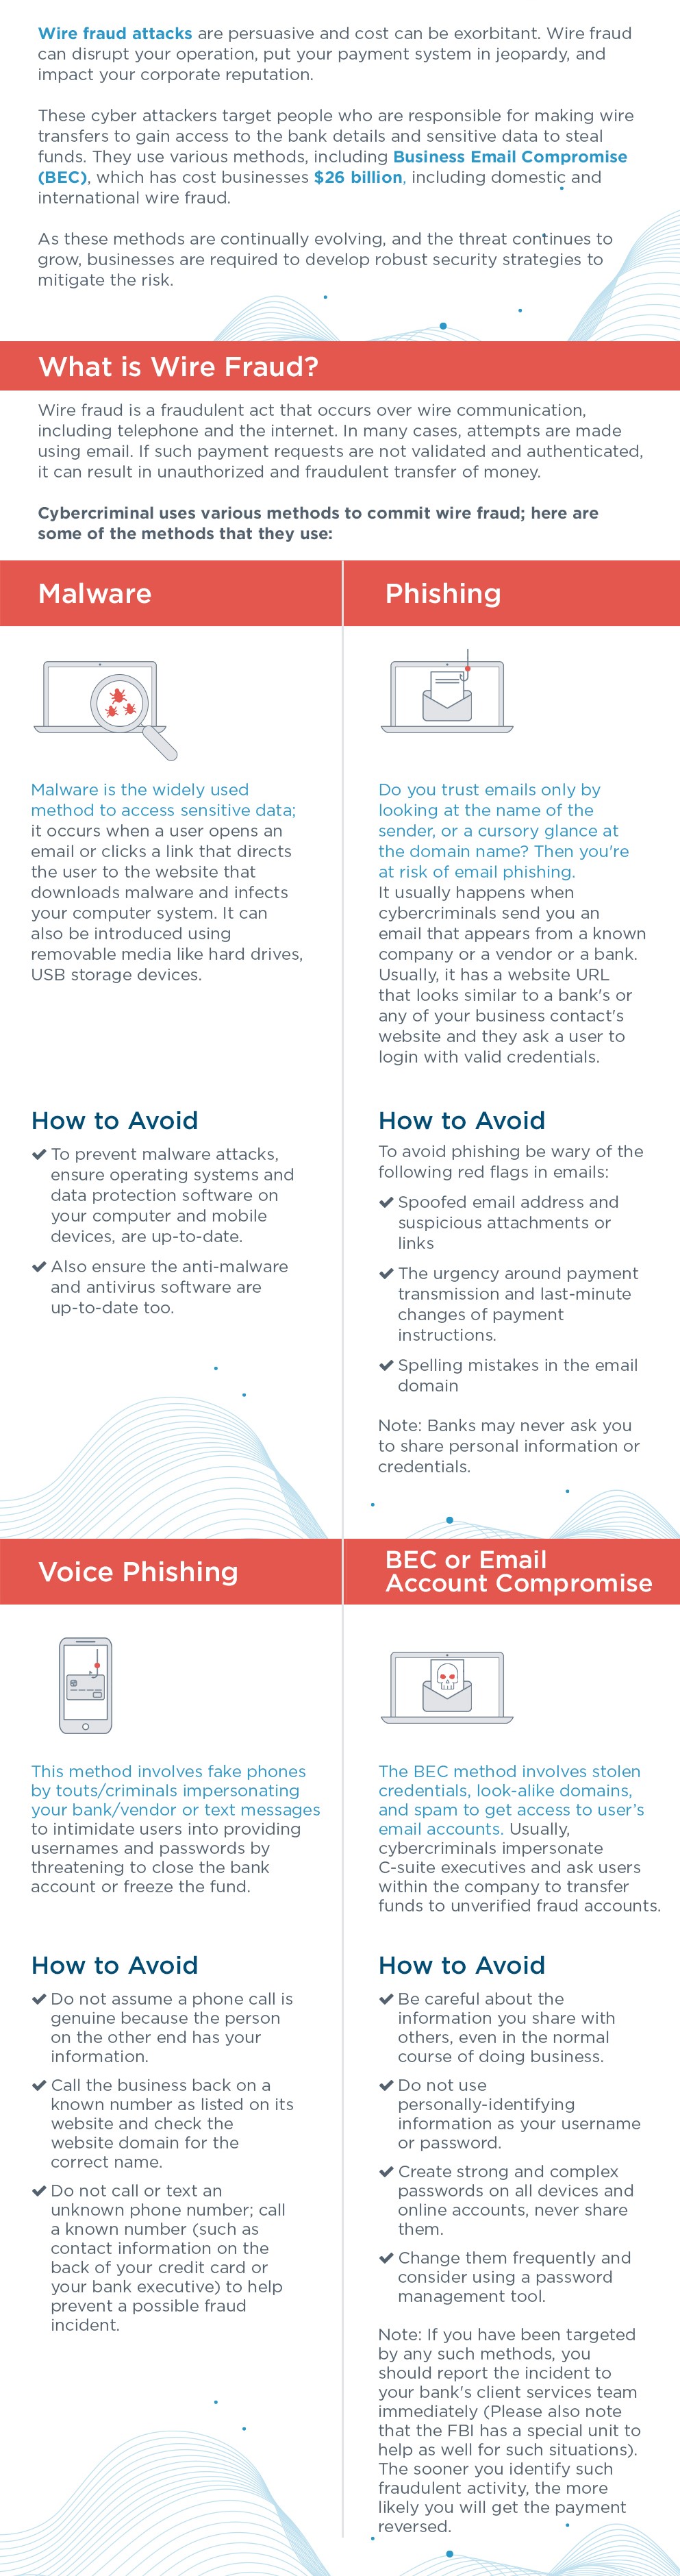 Cloudlex_Wire Fraud Infographic_26th Oct20-02-Final